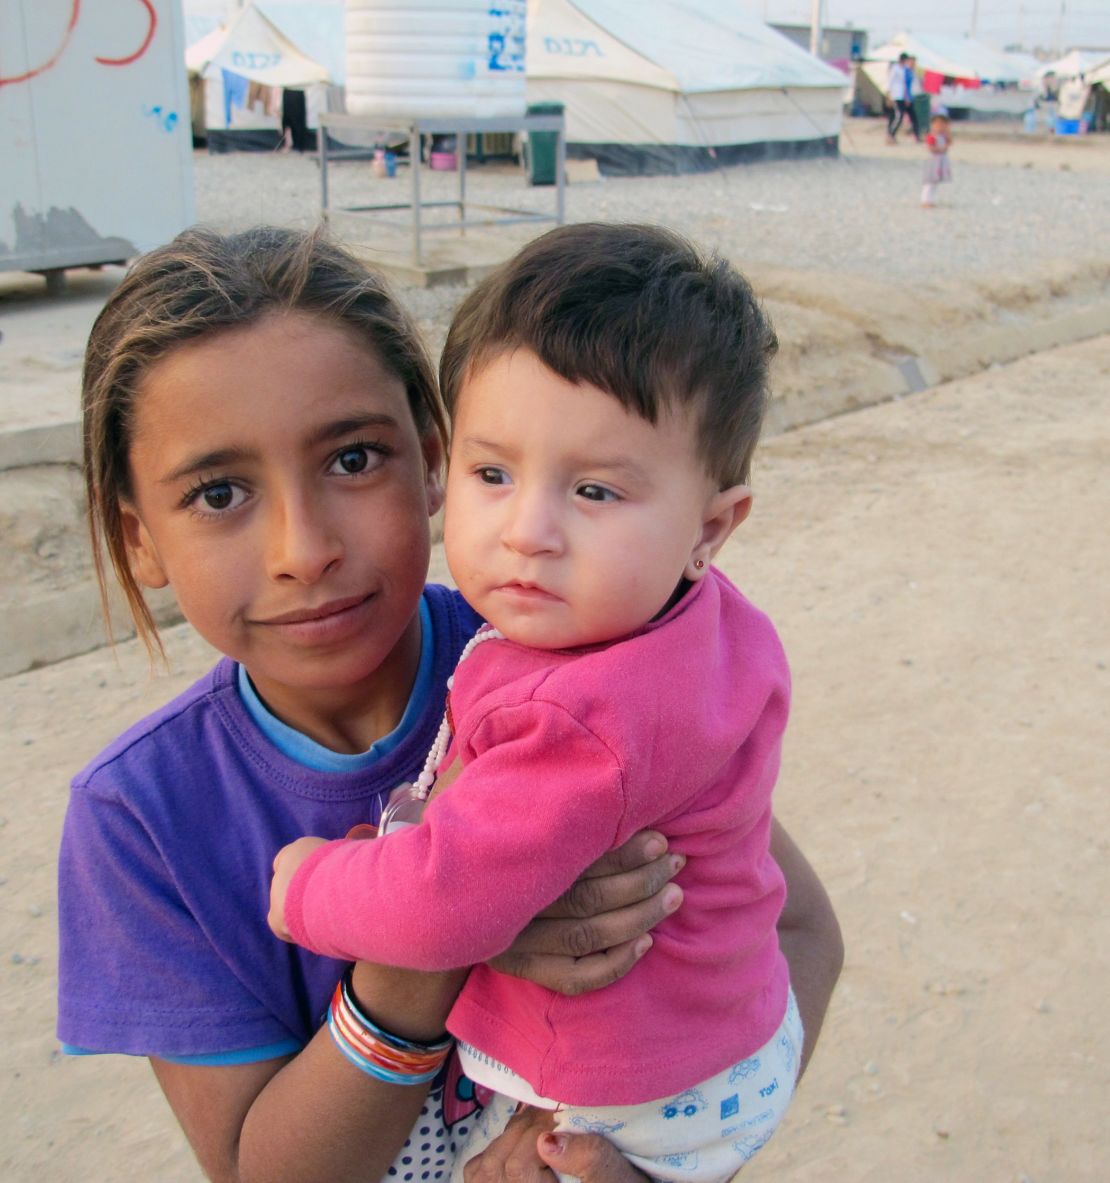 More than 15,000 children displaced from Mosul and its nearby towns and villages are now living at Debaga.